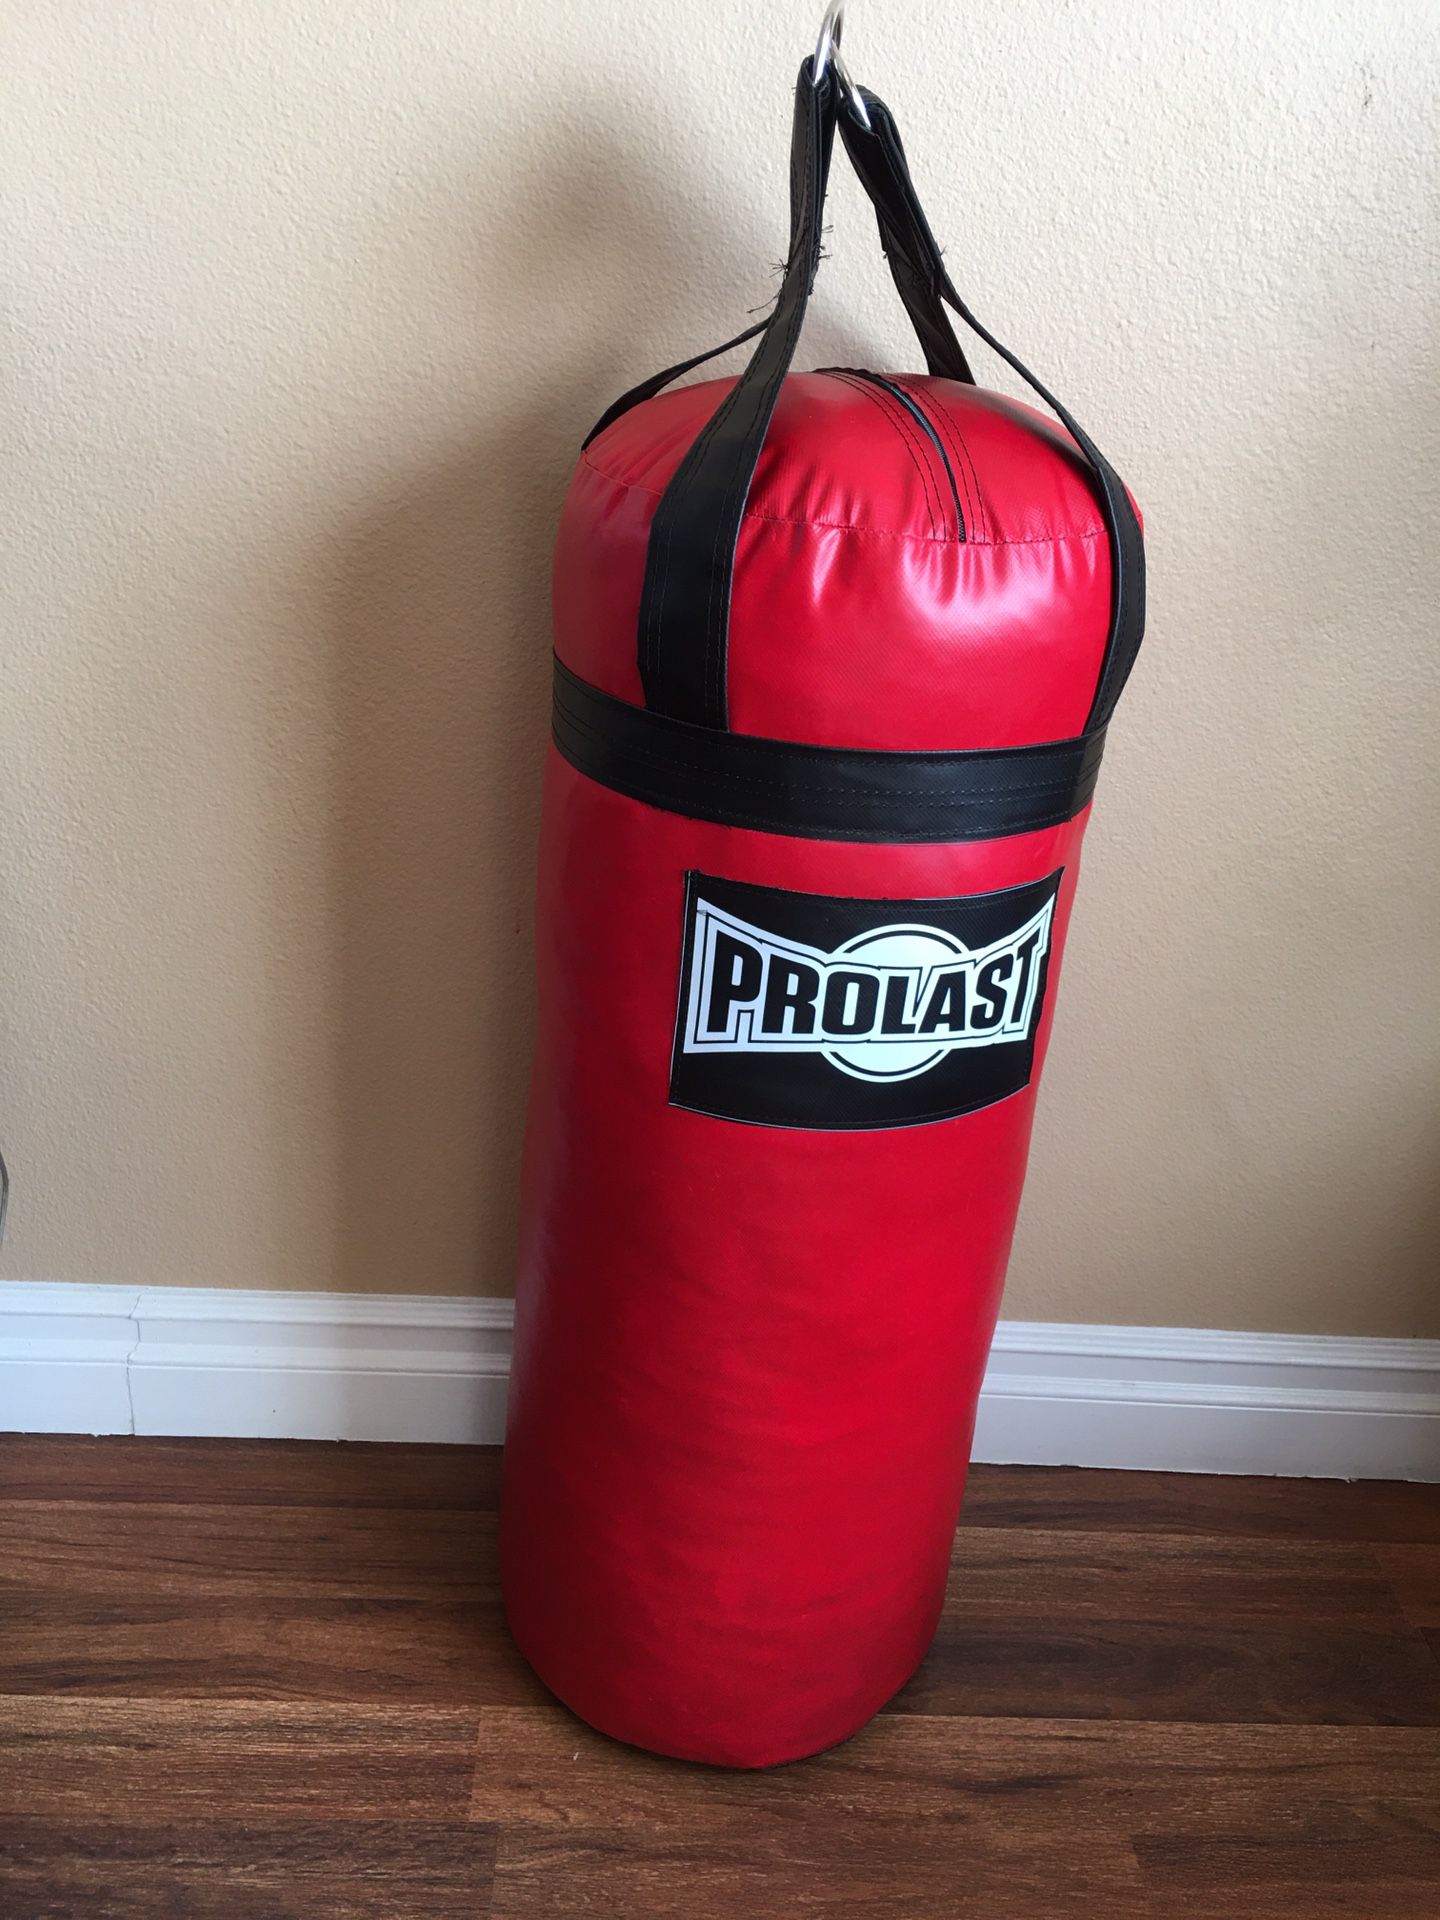 PUNCHING BAG BRAND NEW 70 POUNDS FILLED LUXURY MADE USA 🇺🇸 